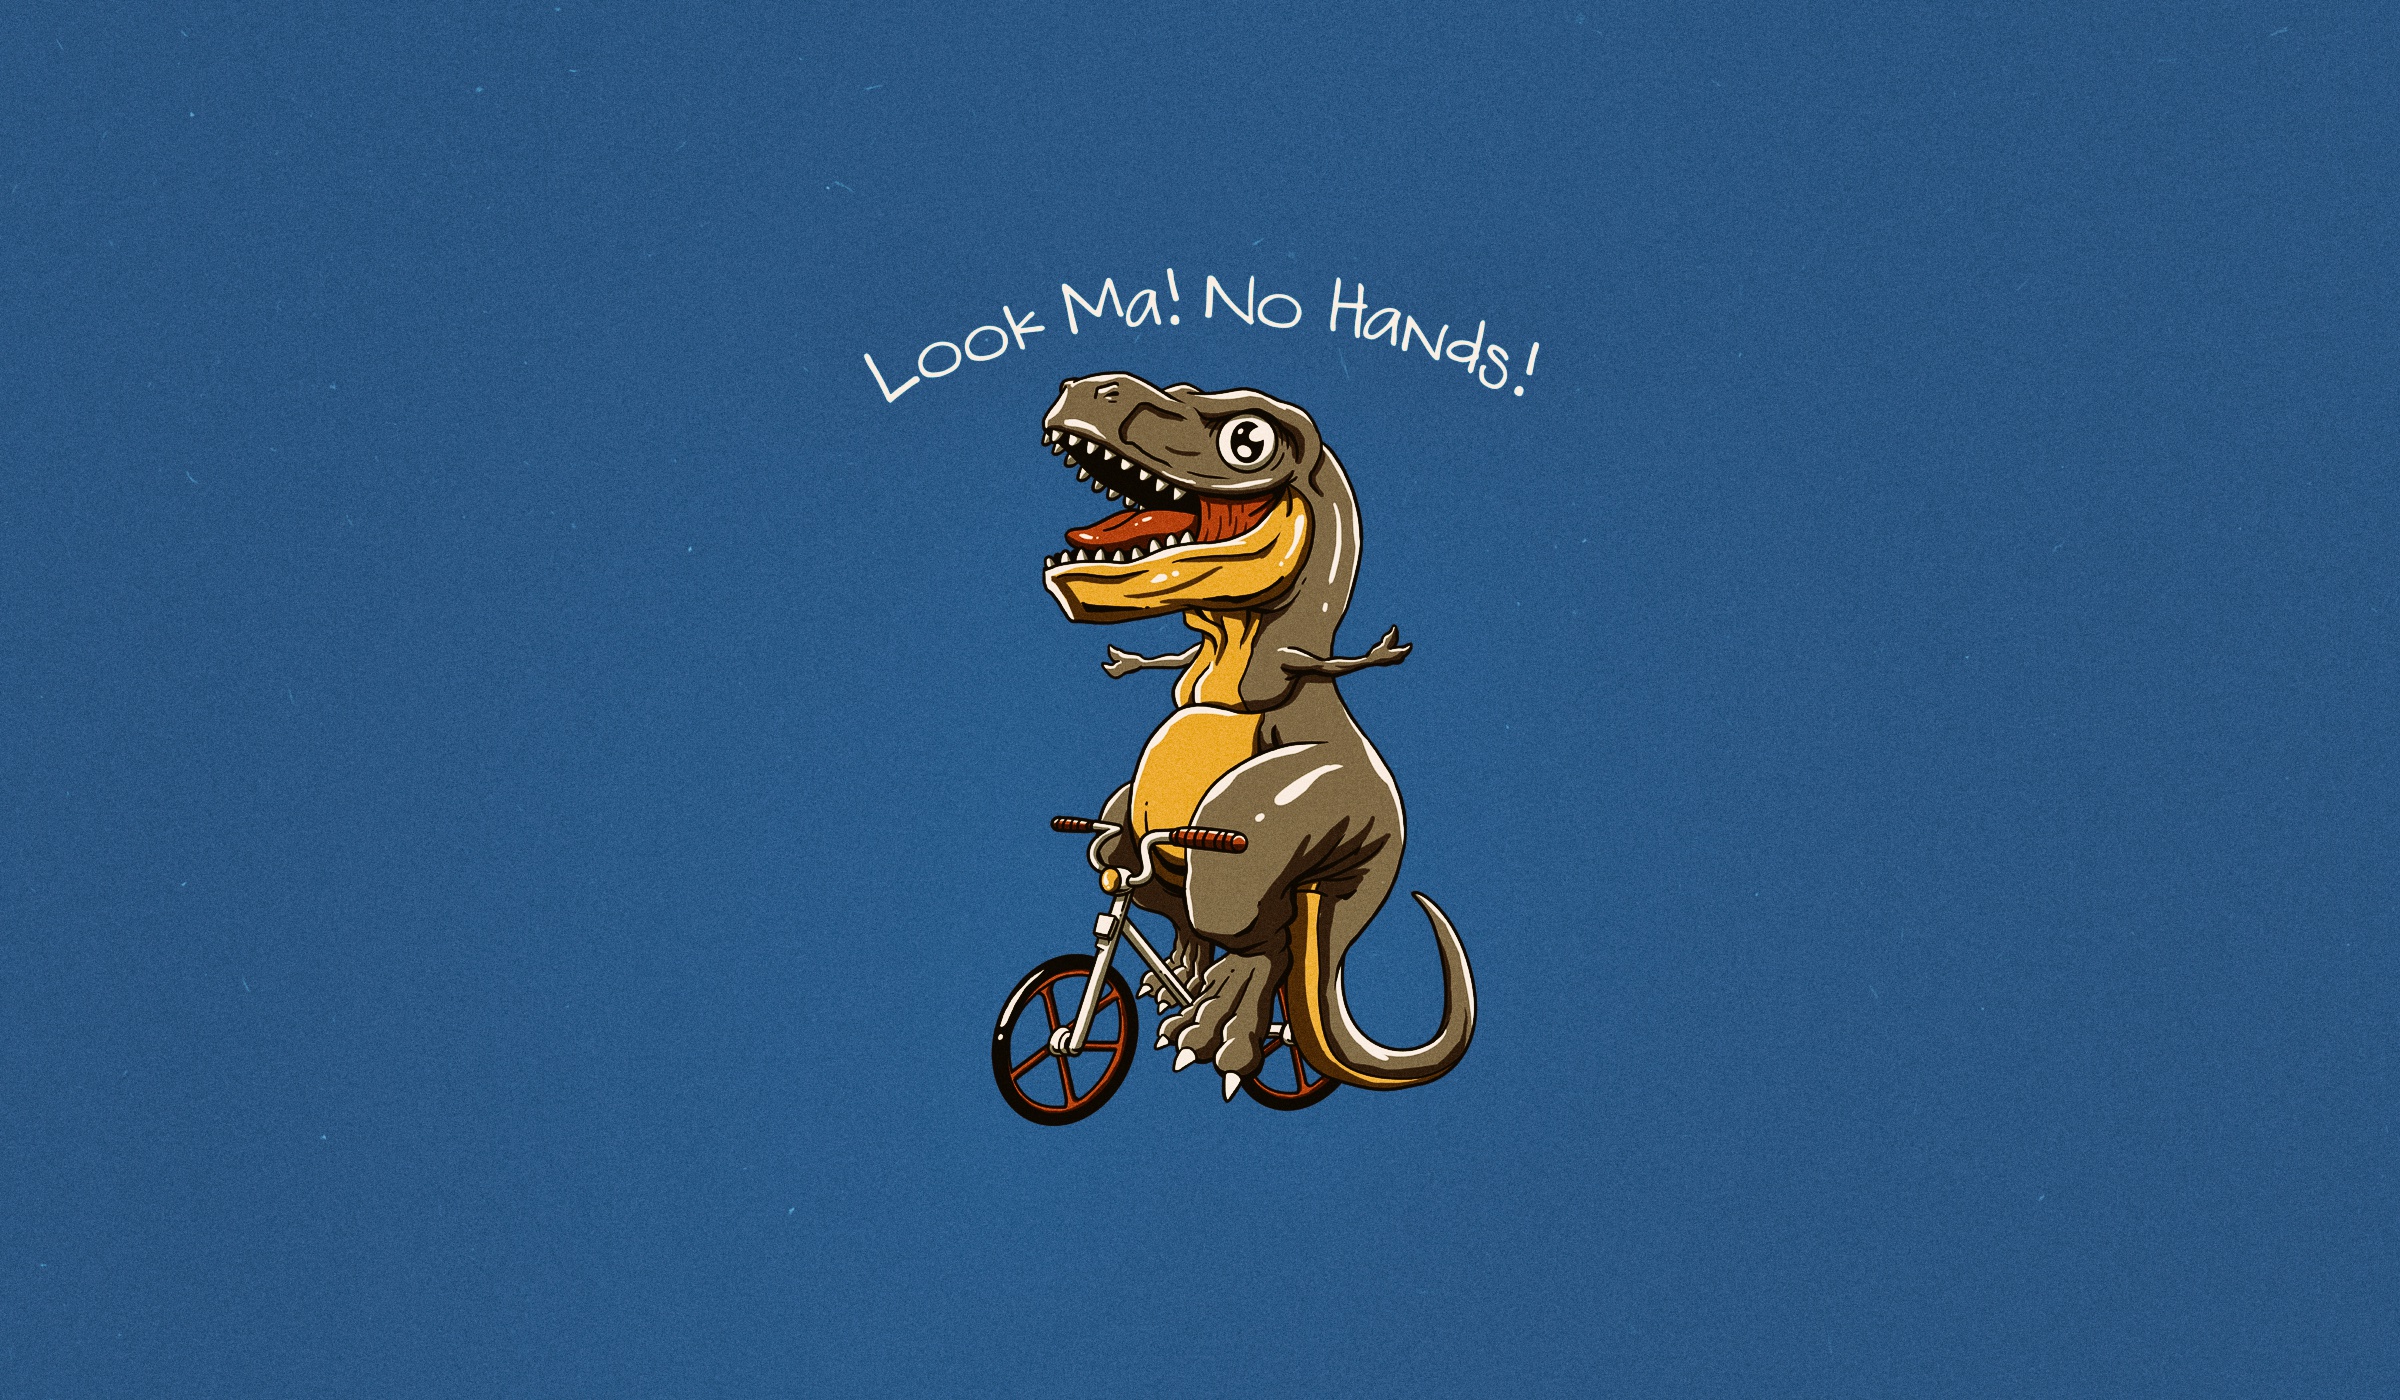 Dinosaur on a Bicycle "Look Ma! No Hands"